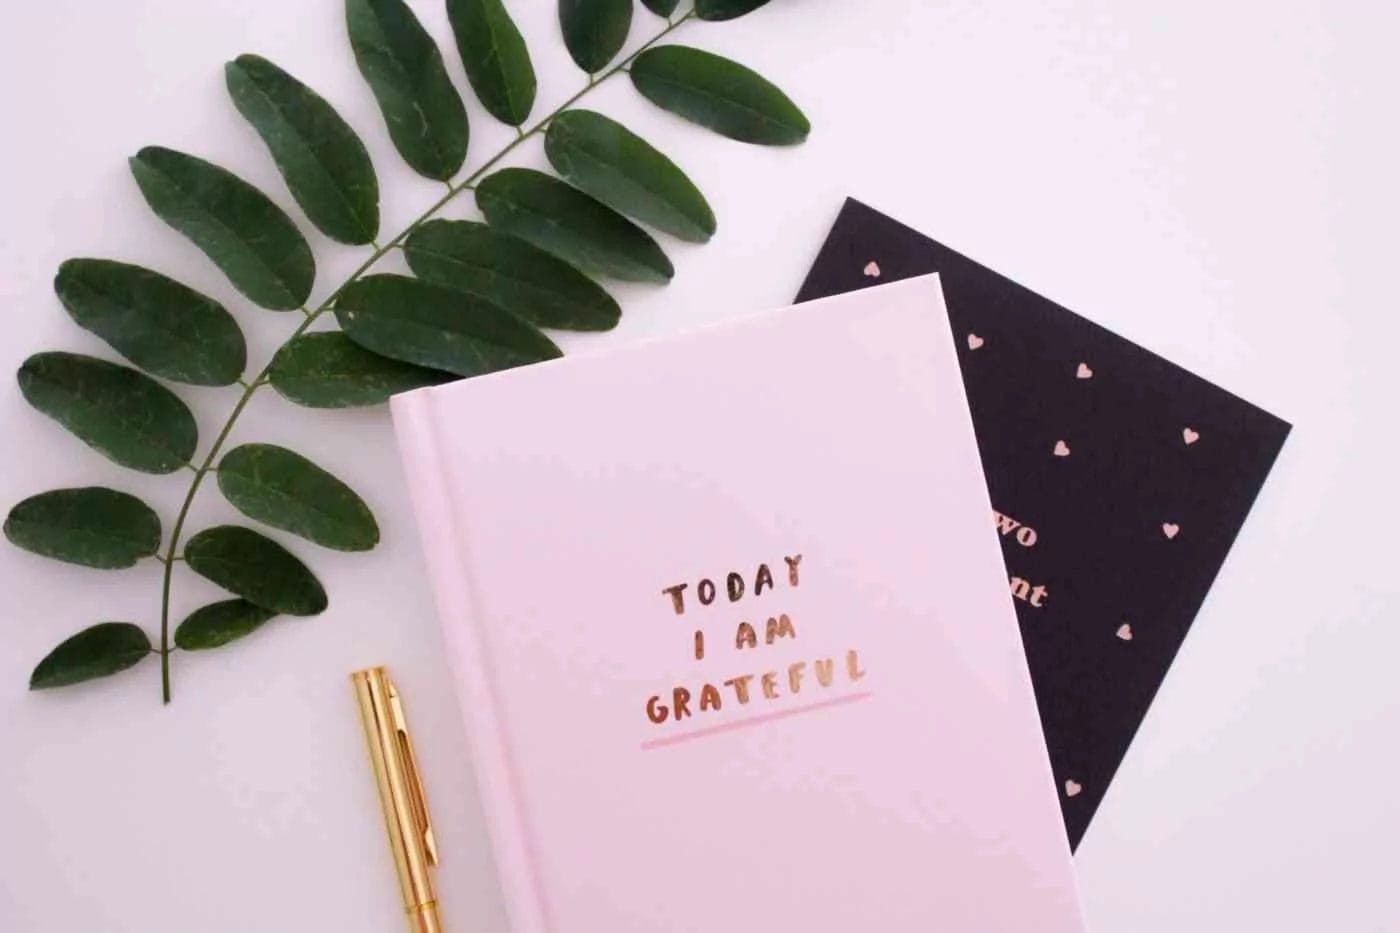 mindful morning routine journal for gratitude